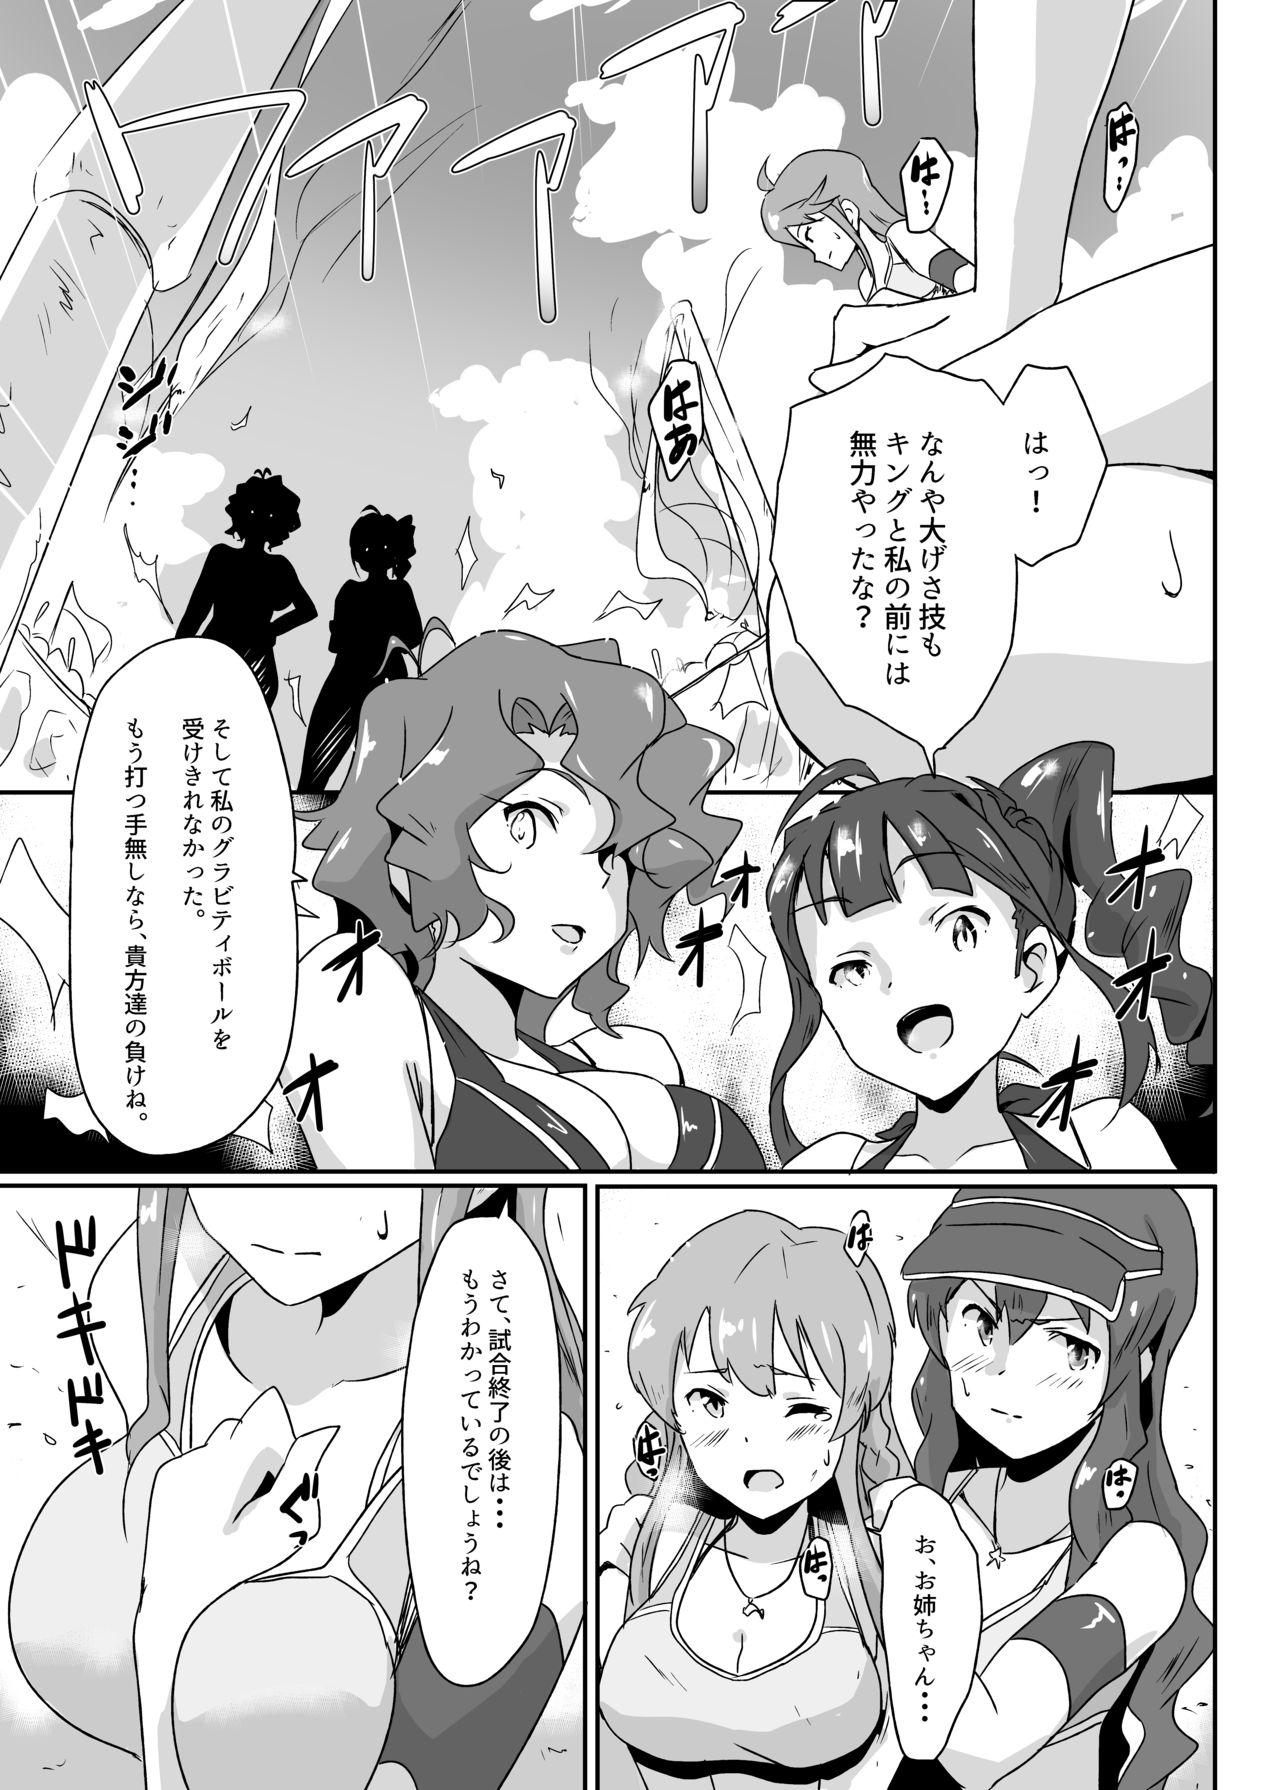 Female Domination Gang Bangs Volleyball!!! - The idolmaster Bro - Page 2